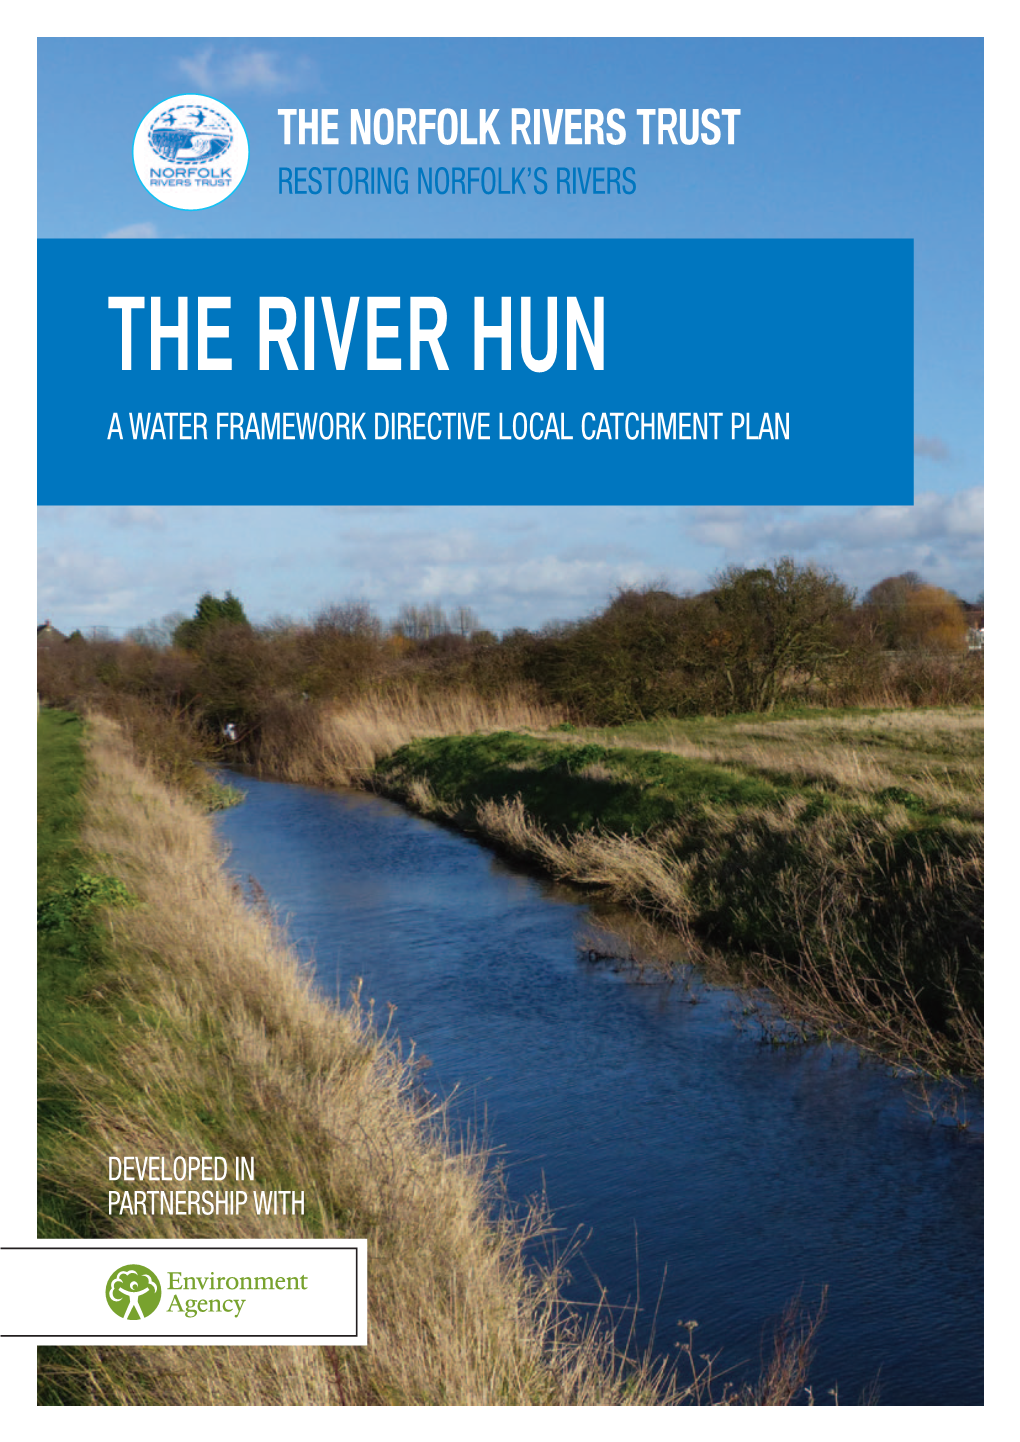 The River Hun a Water Framework Directive Local Catchment Plan